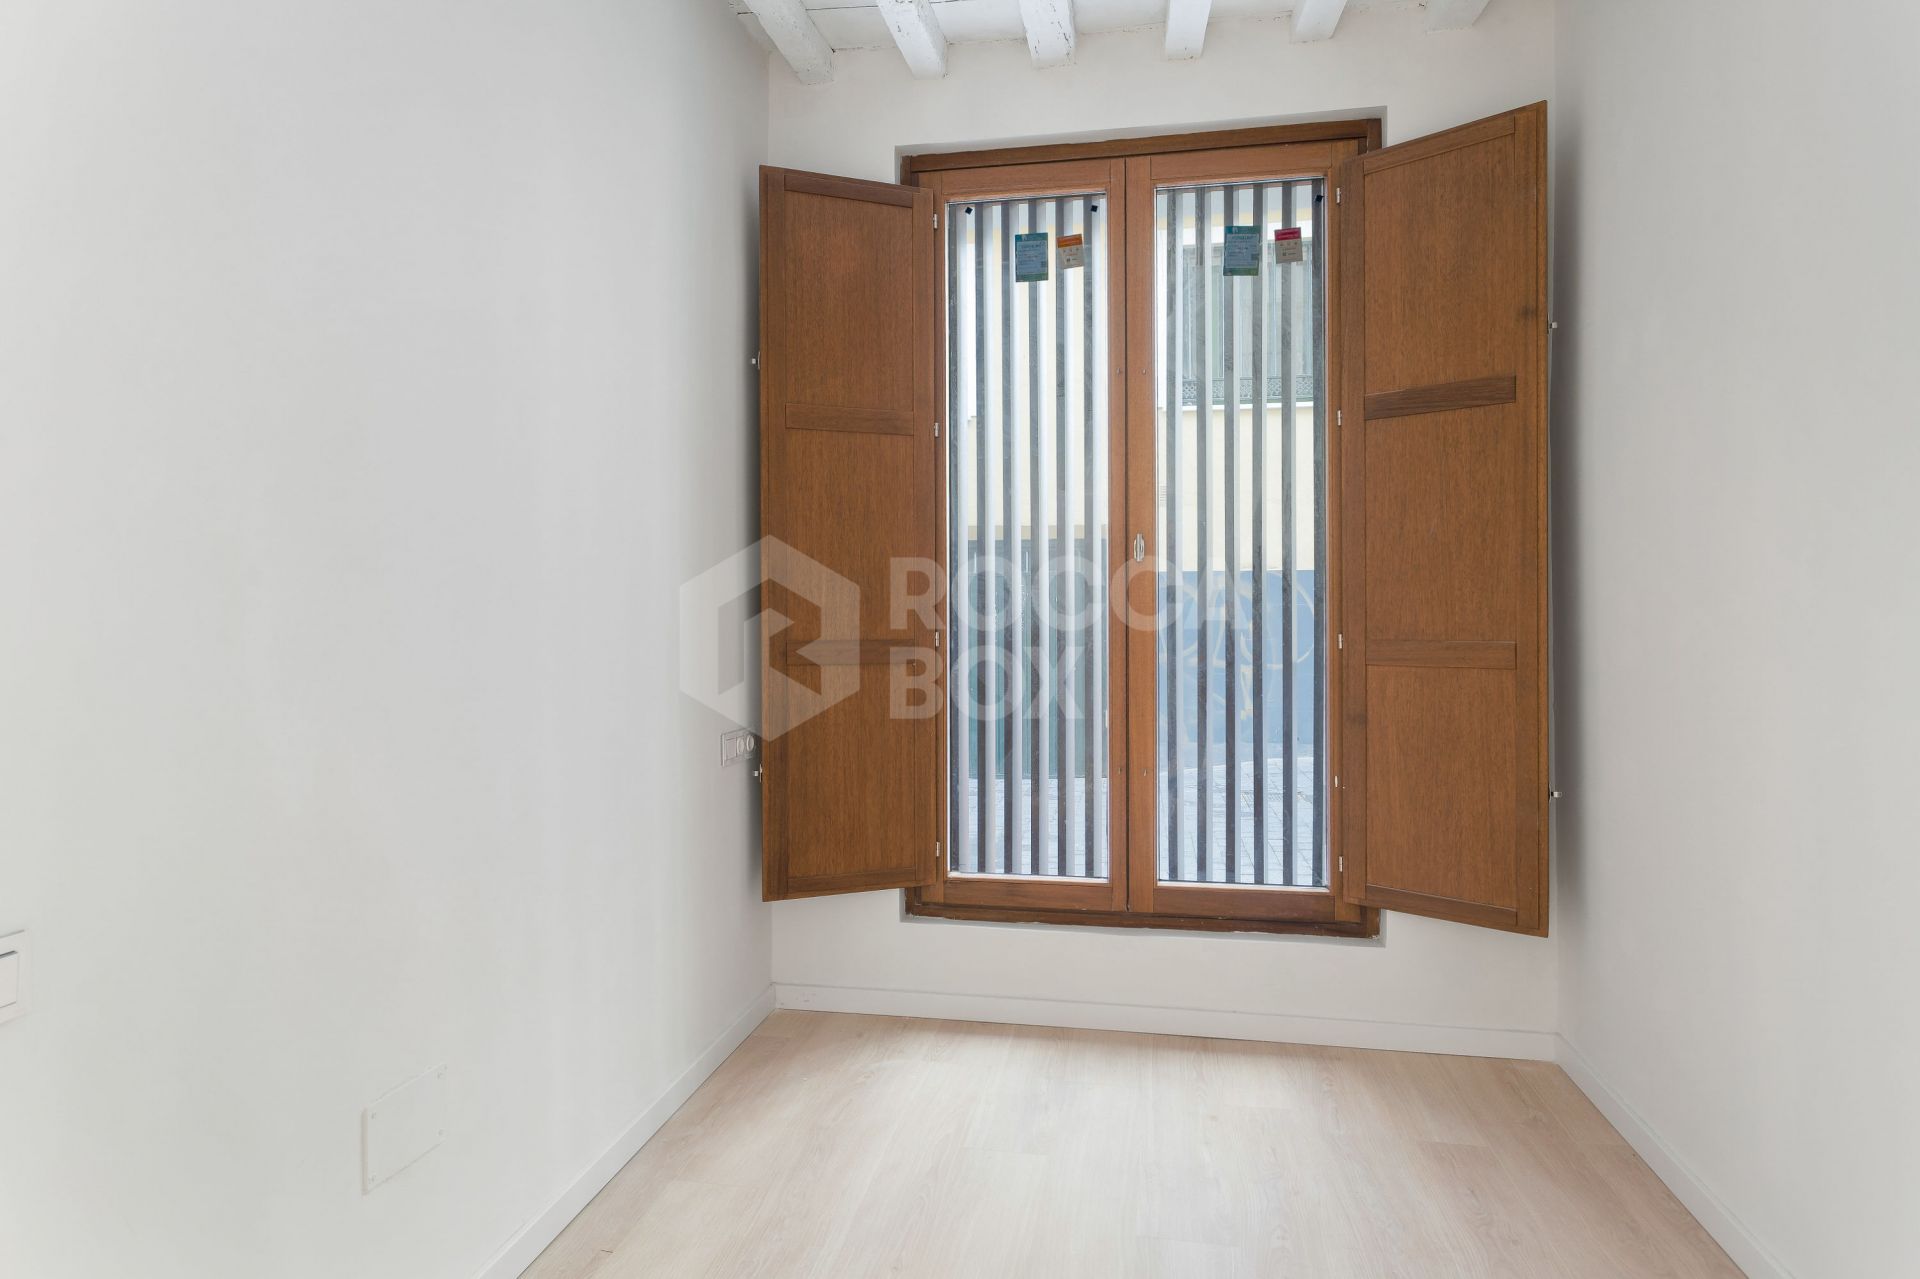 Luxury ground floor apartment in historic building with 2 private patios on a quiet street in the historical quarters of Malaga City.